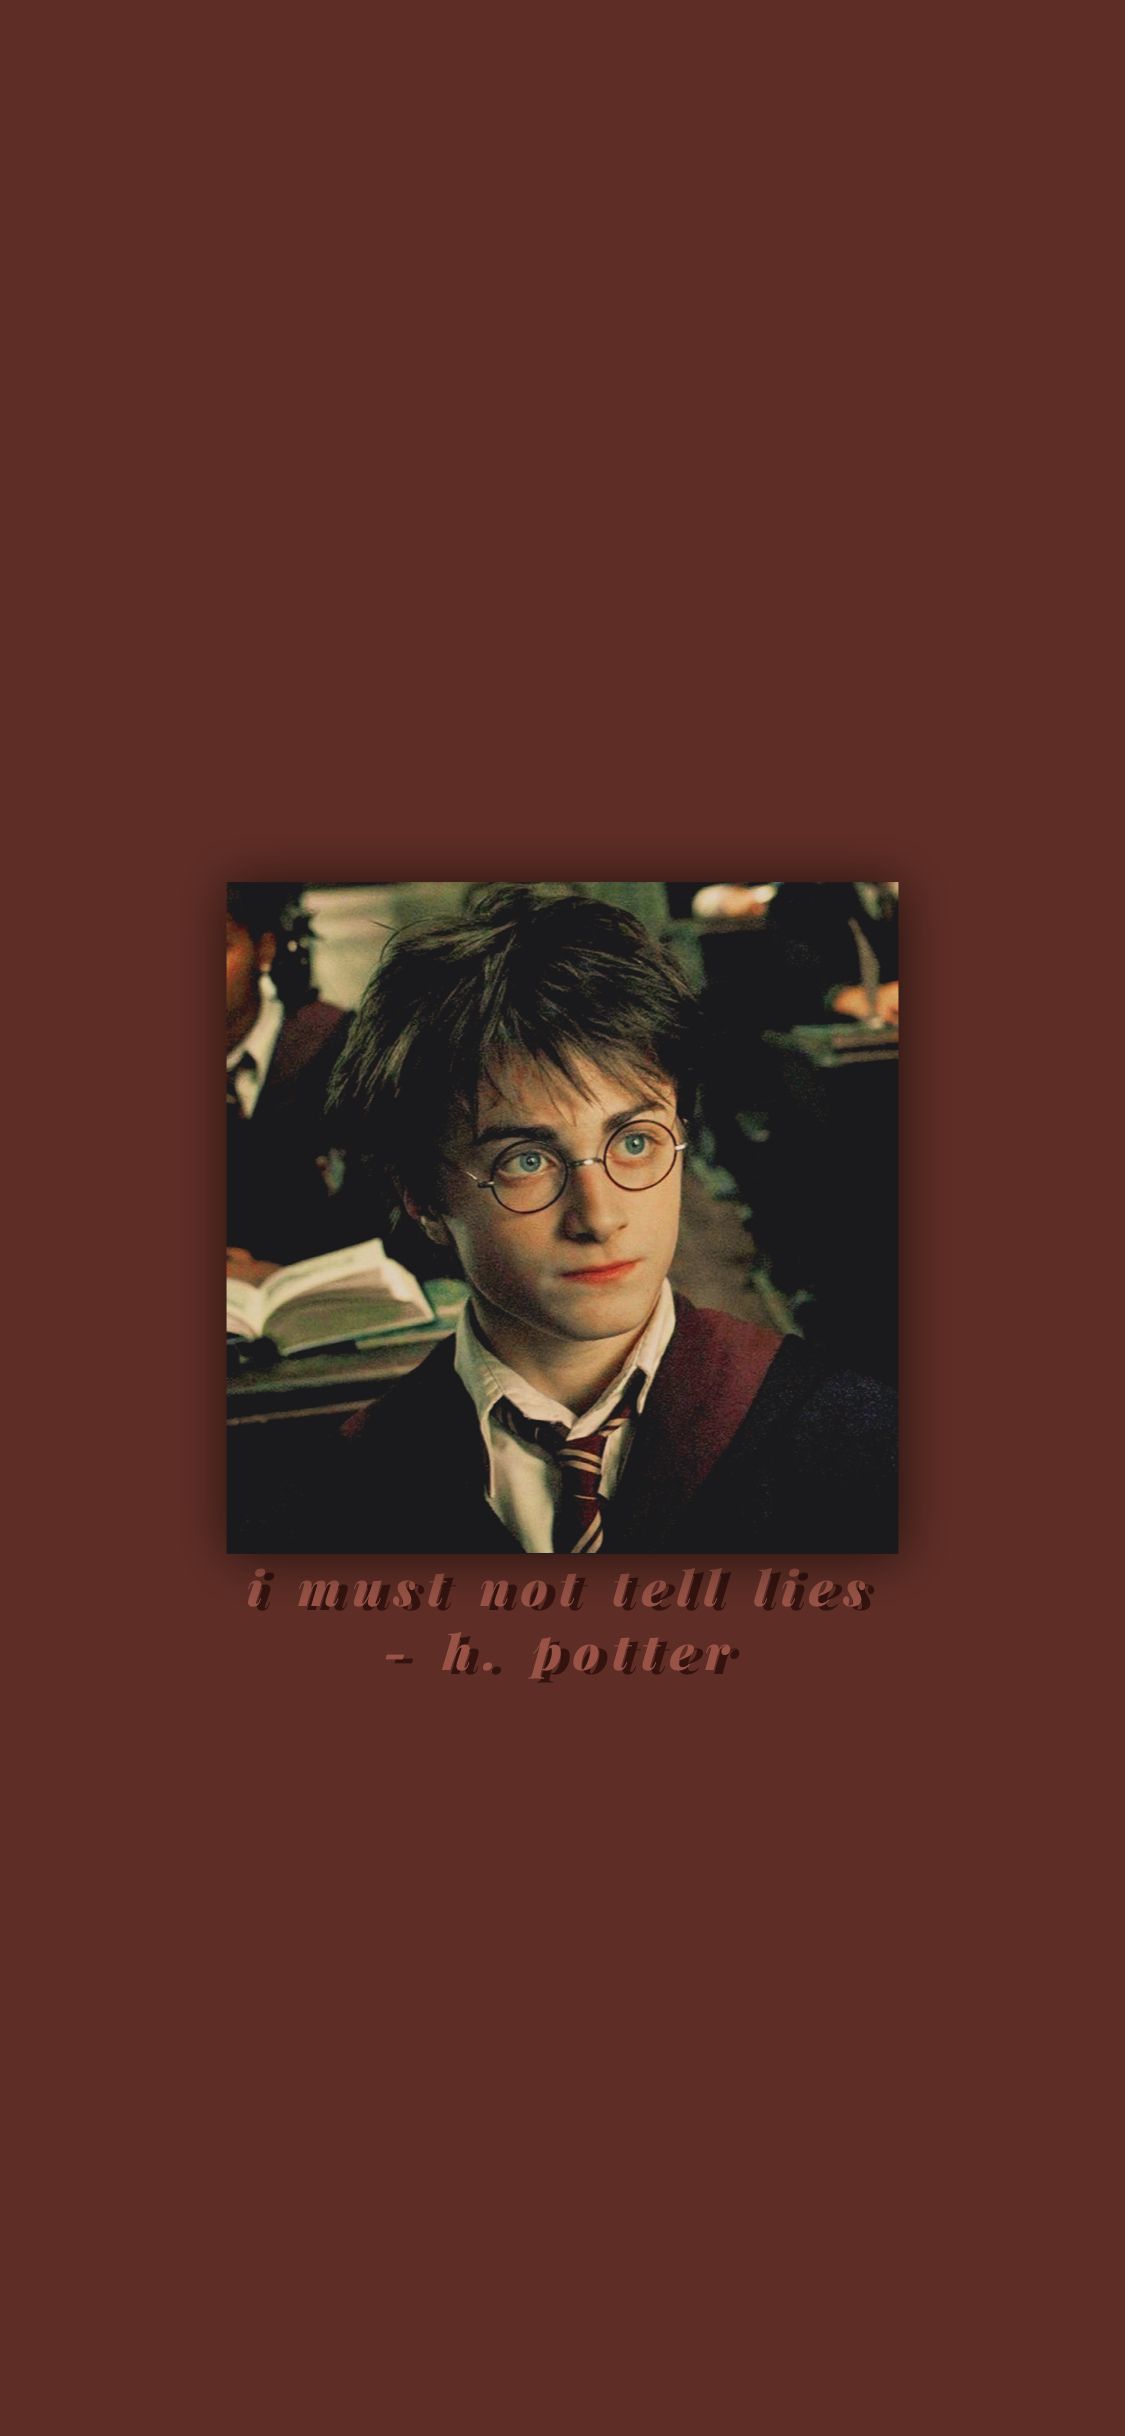 Harry Potter wallpaper for your phone! - Harry Potter